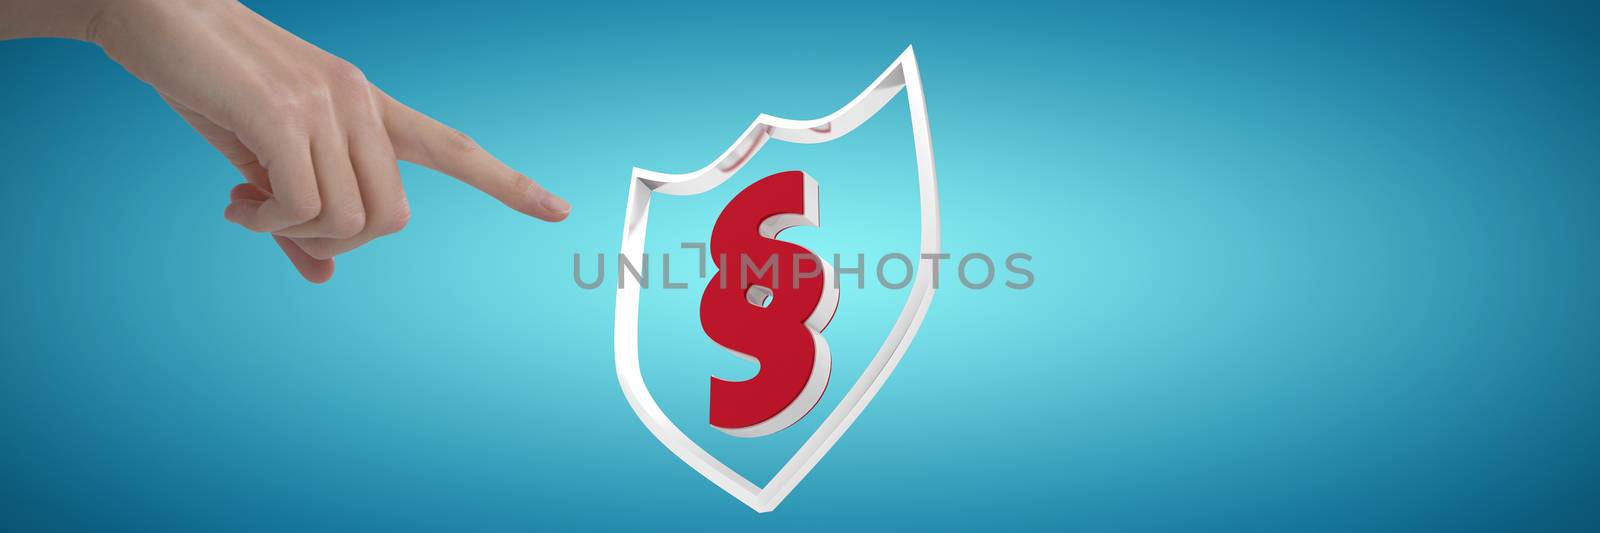 Womans hand using invisible screen against abstract blue background